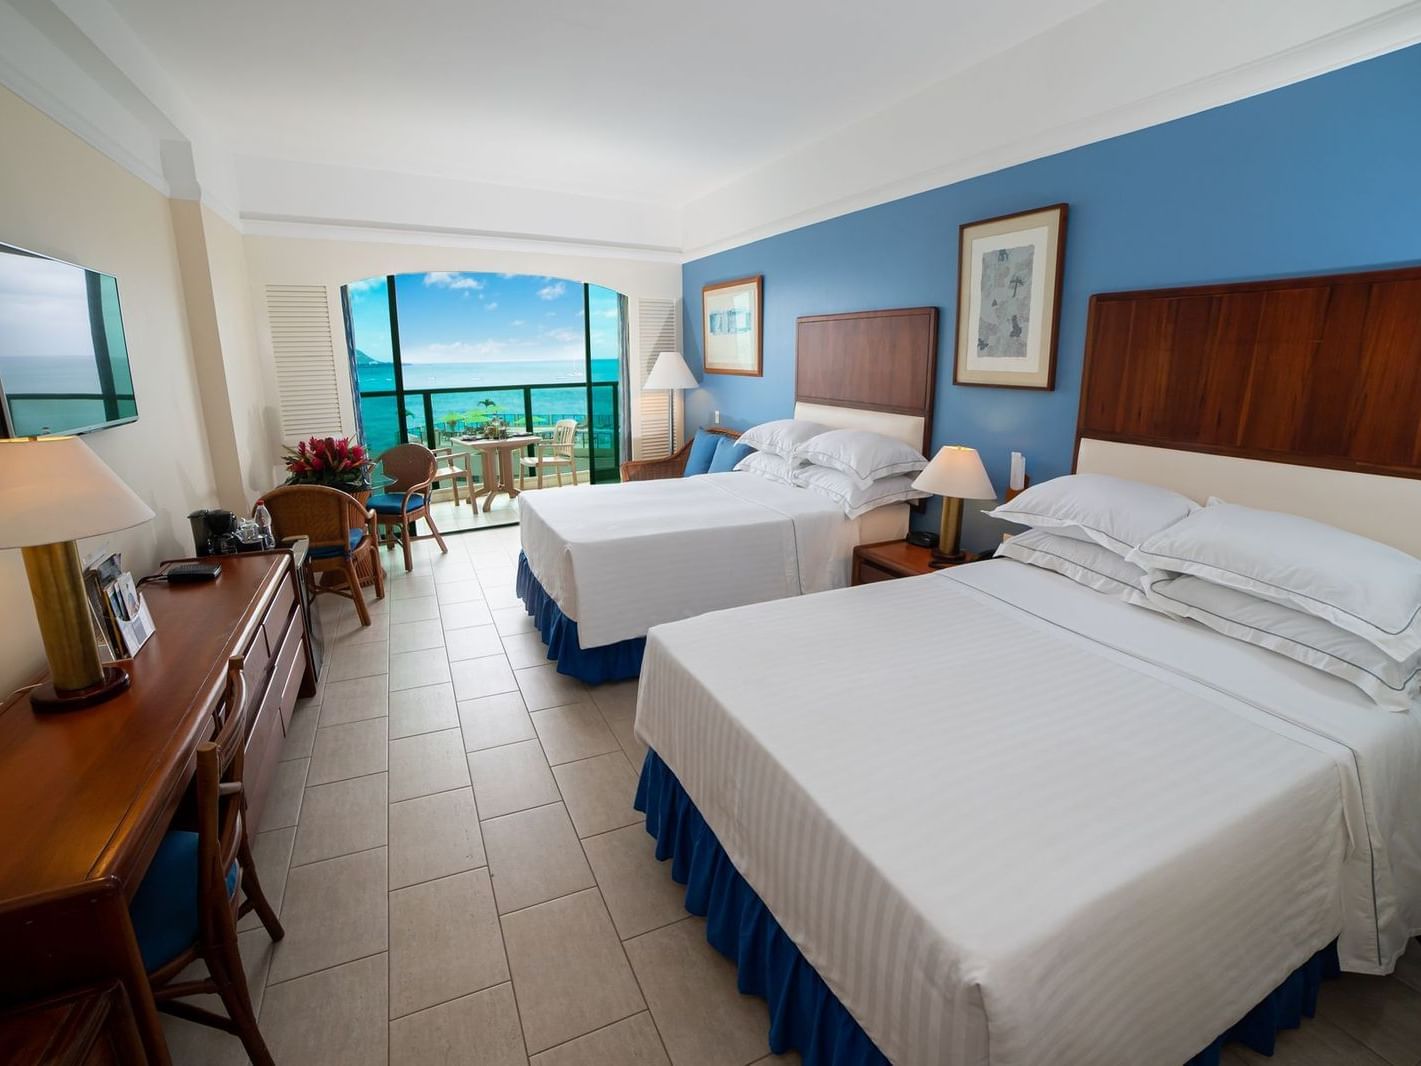 Interior of Double Room with Ocean View at Hotel Colón Salinas